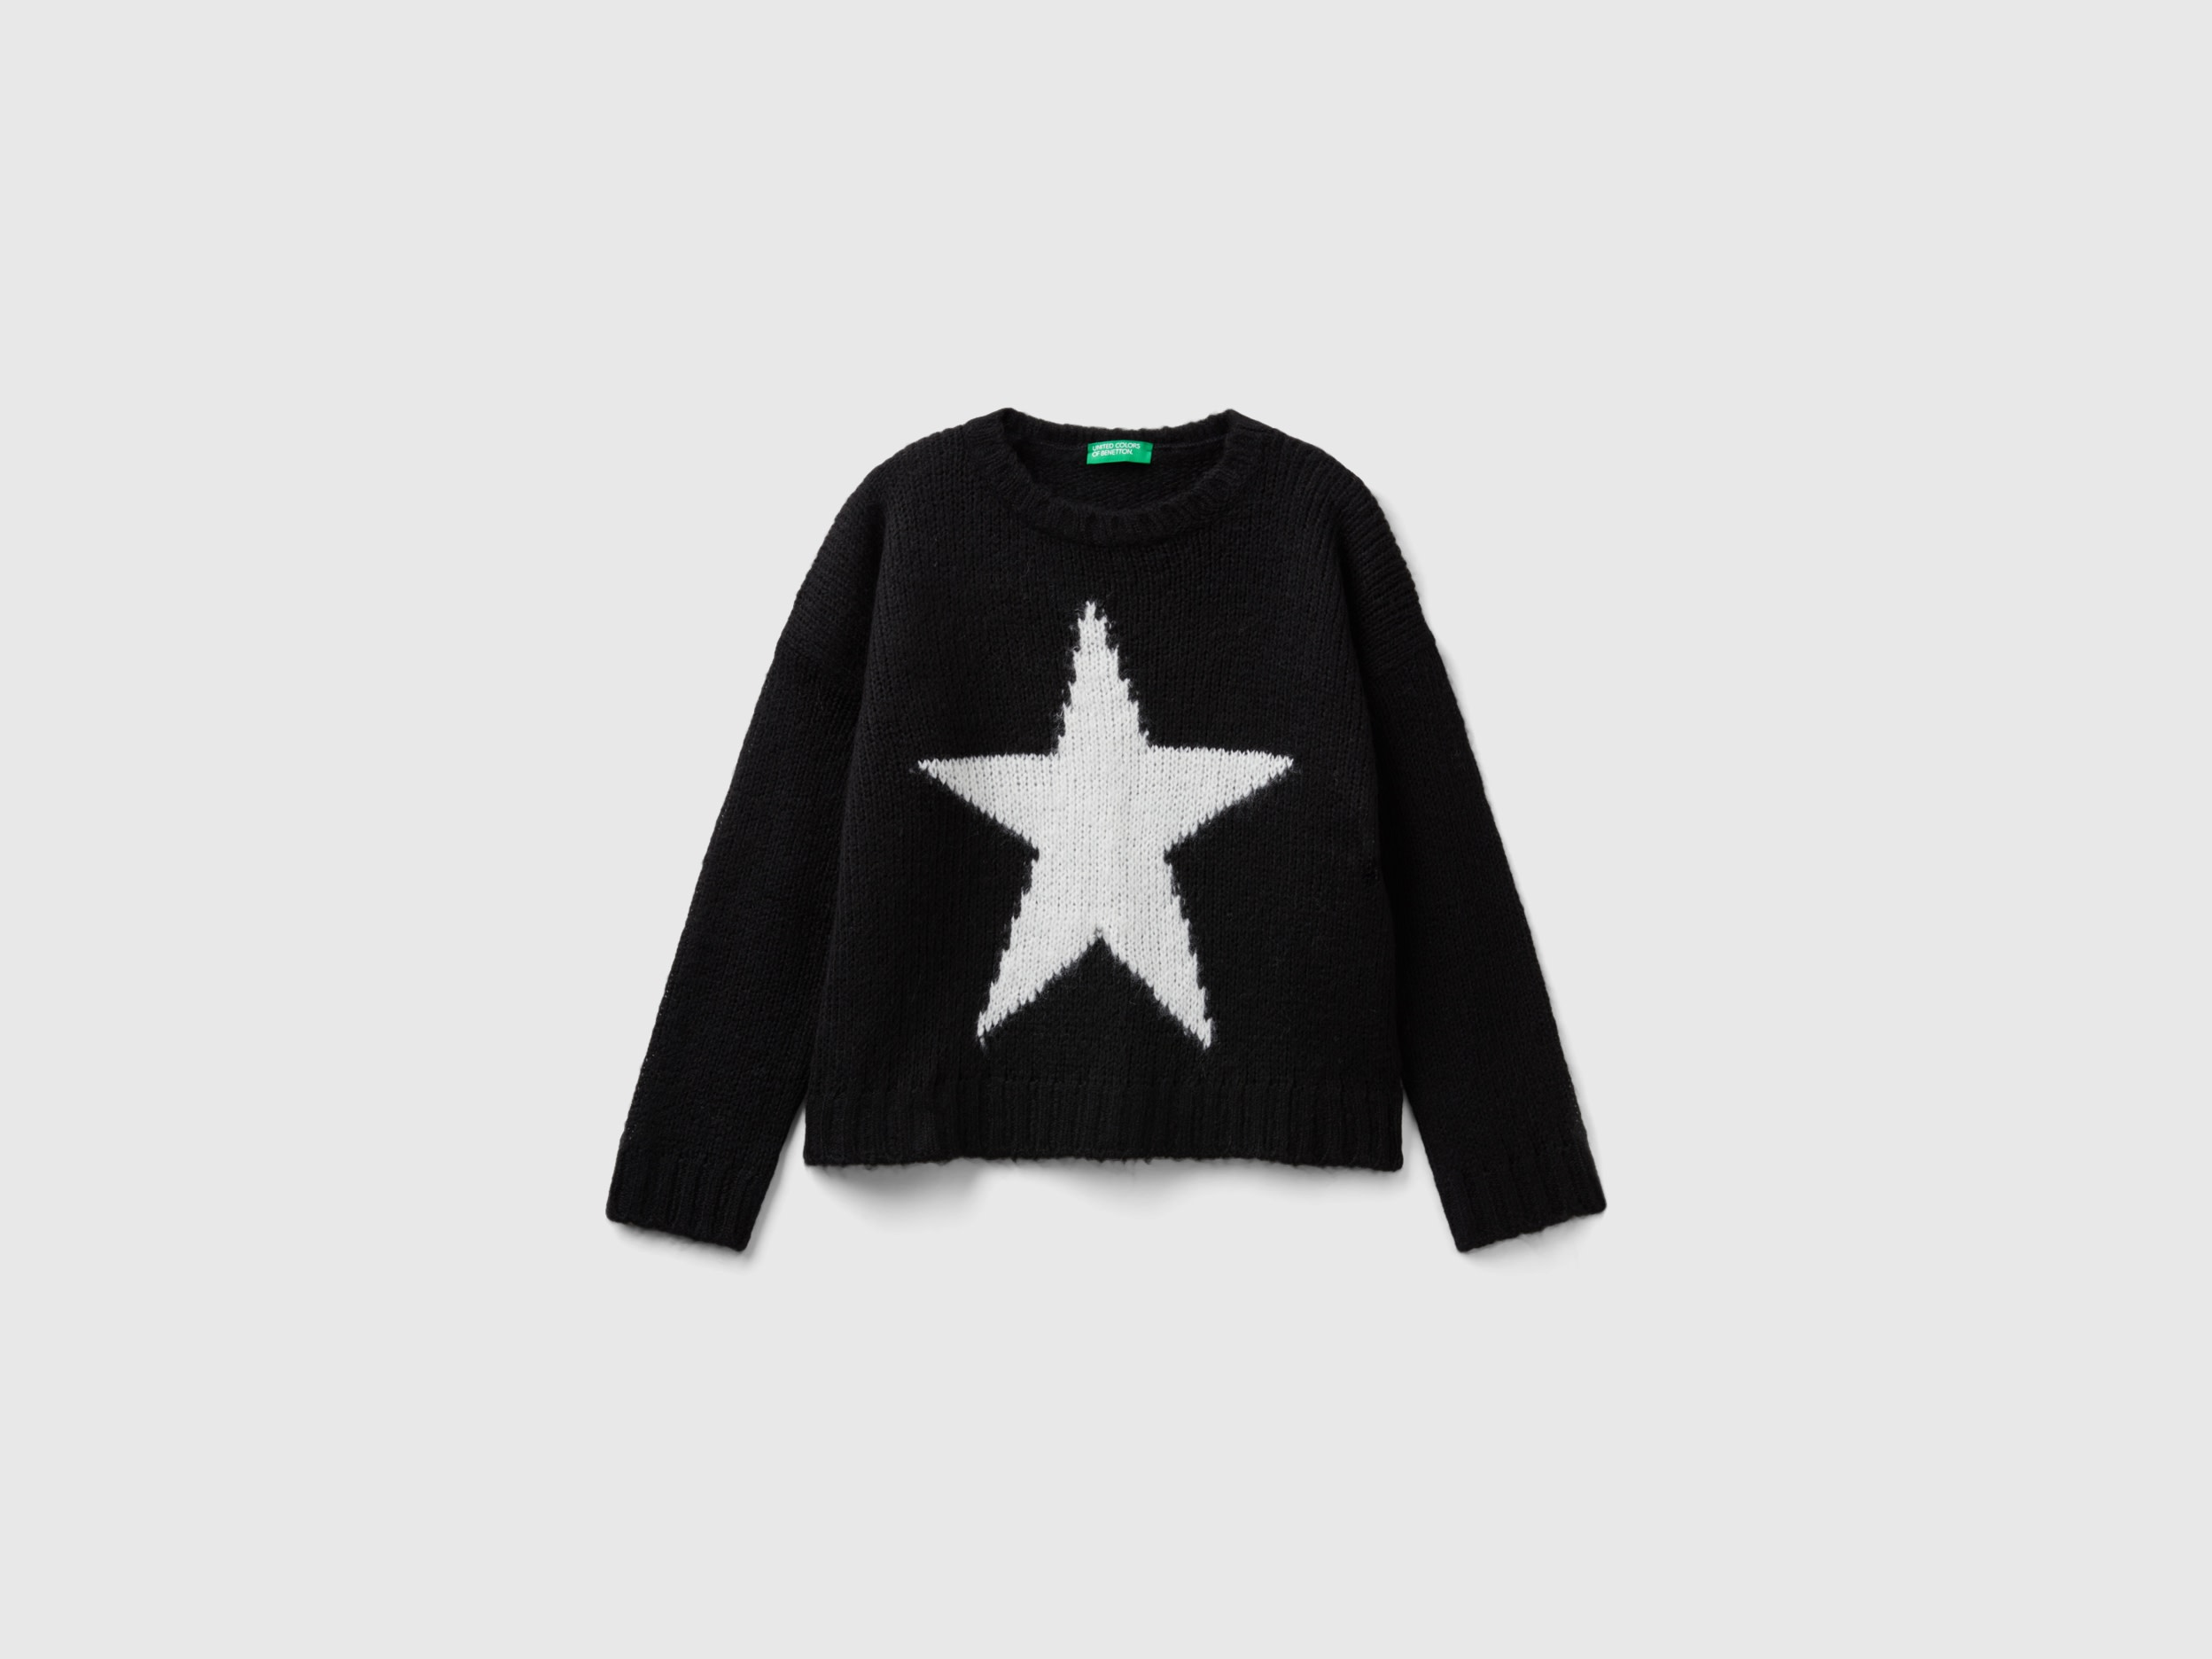 Benetton, Sweater With Star Inlay, size 2XL, Black, Kids